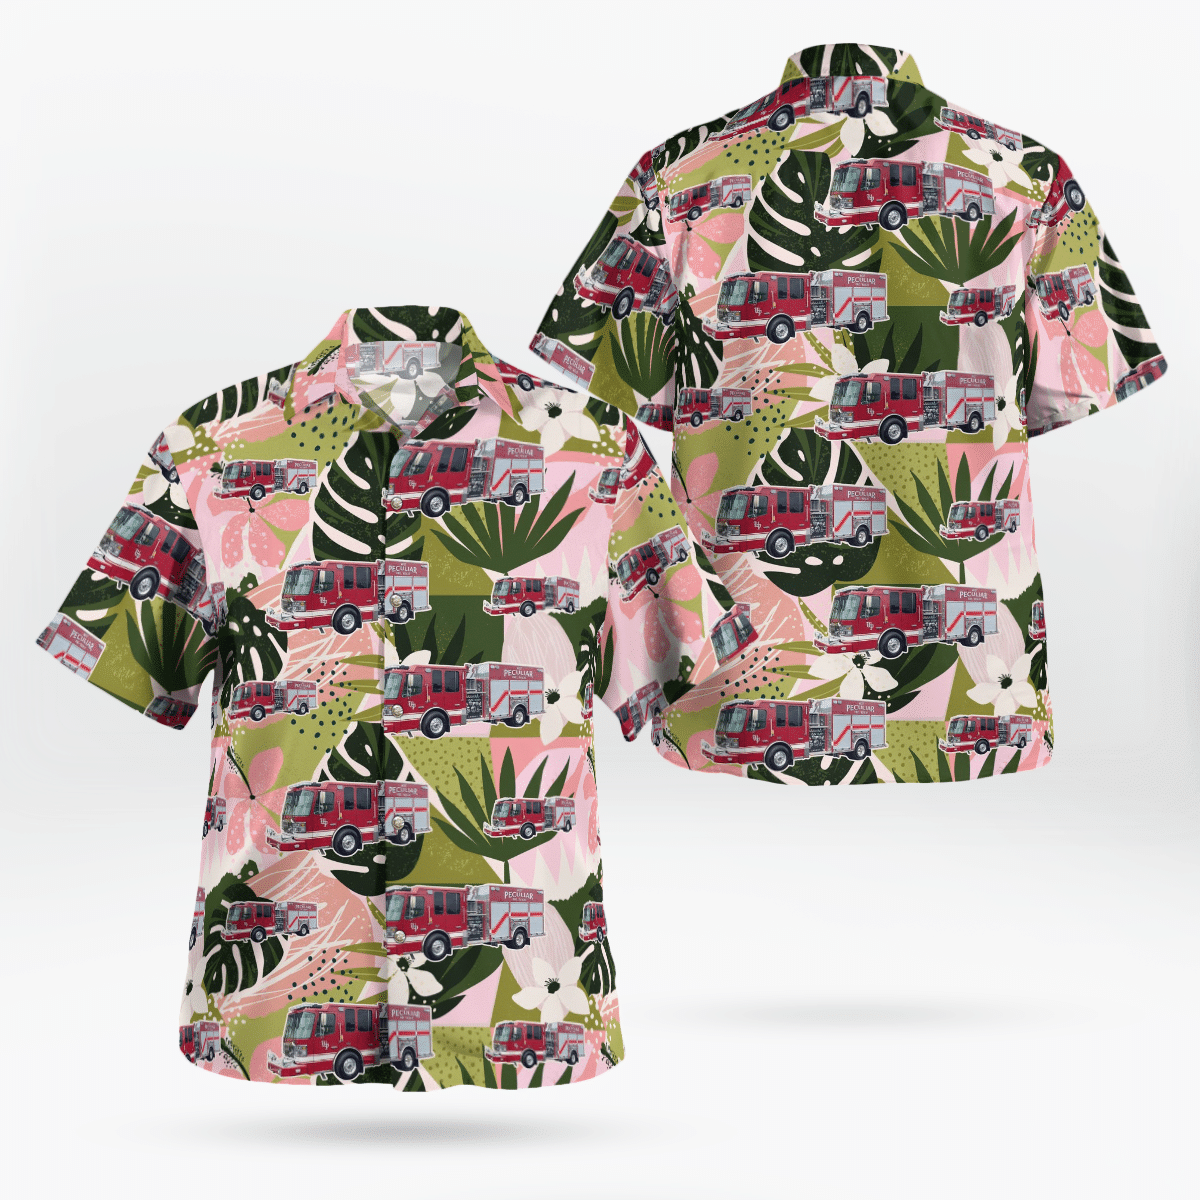 If you are in need of a new summertime look, pick up this Hawaiian shirt 63